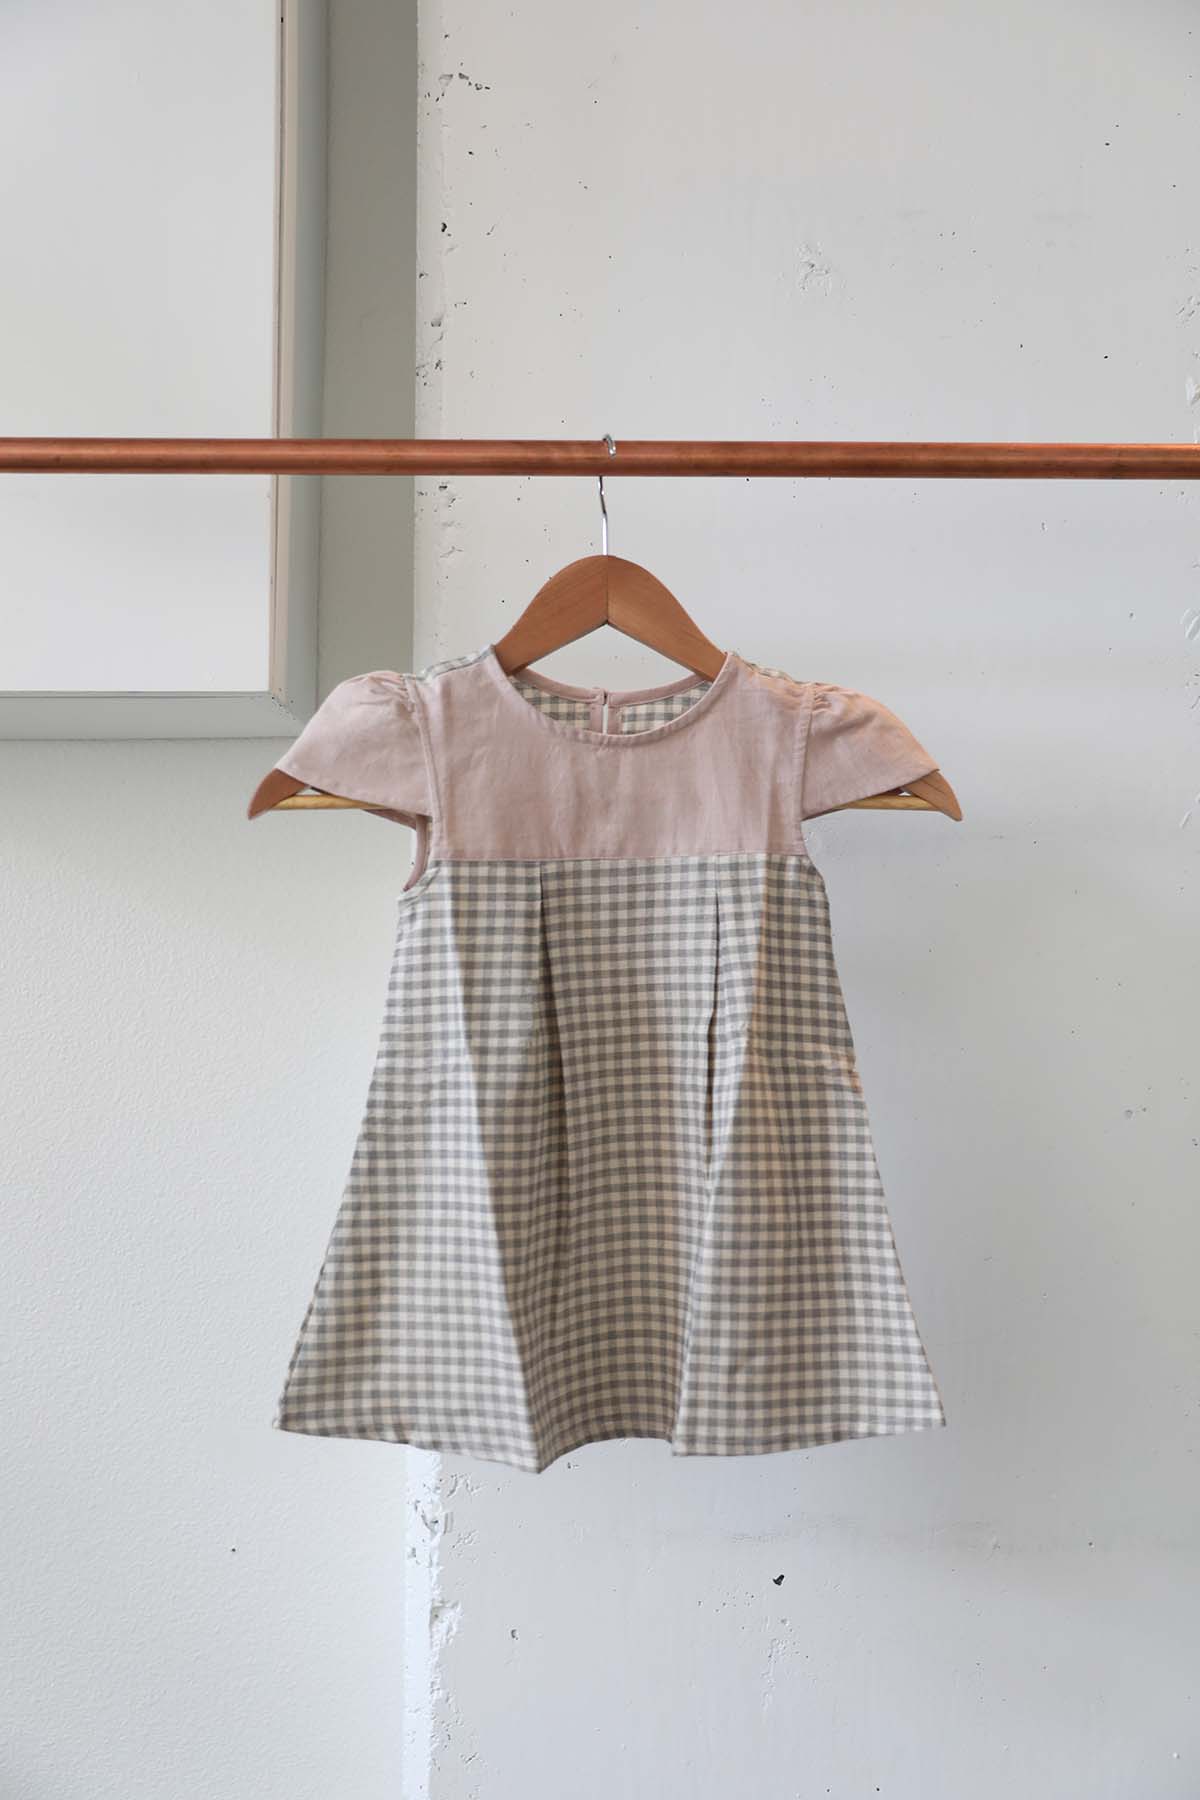 Girls dress with a pink top and plaid bottom in grey and cream with short sleeves ethically made by Goel Community in Cambodia